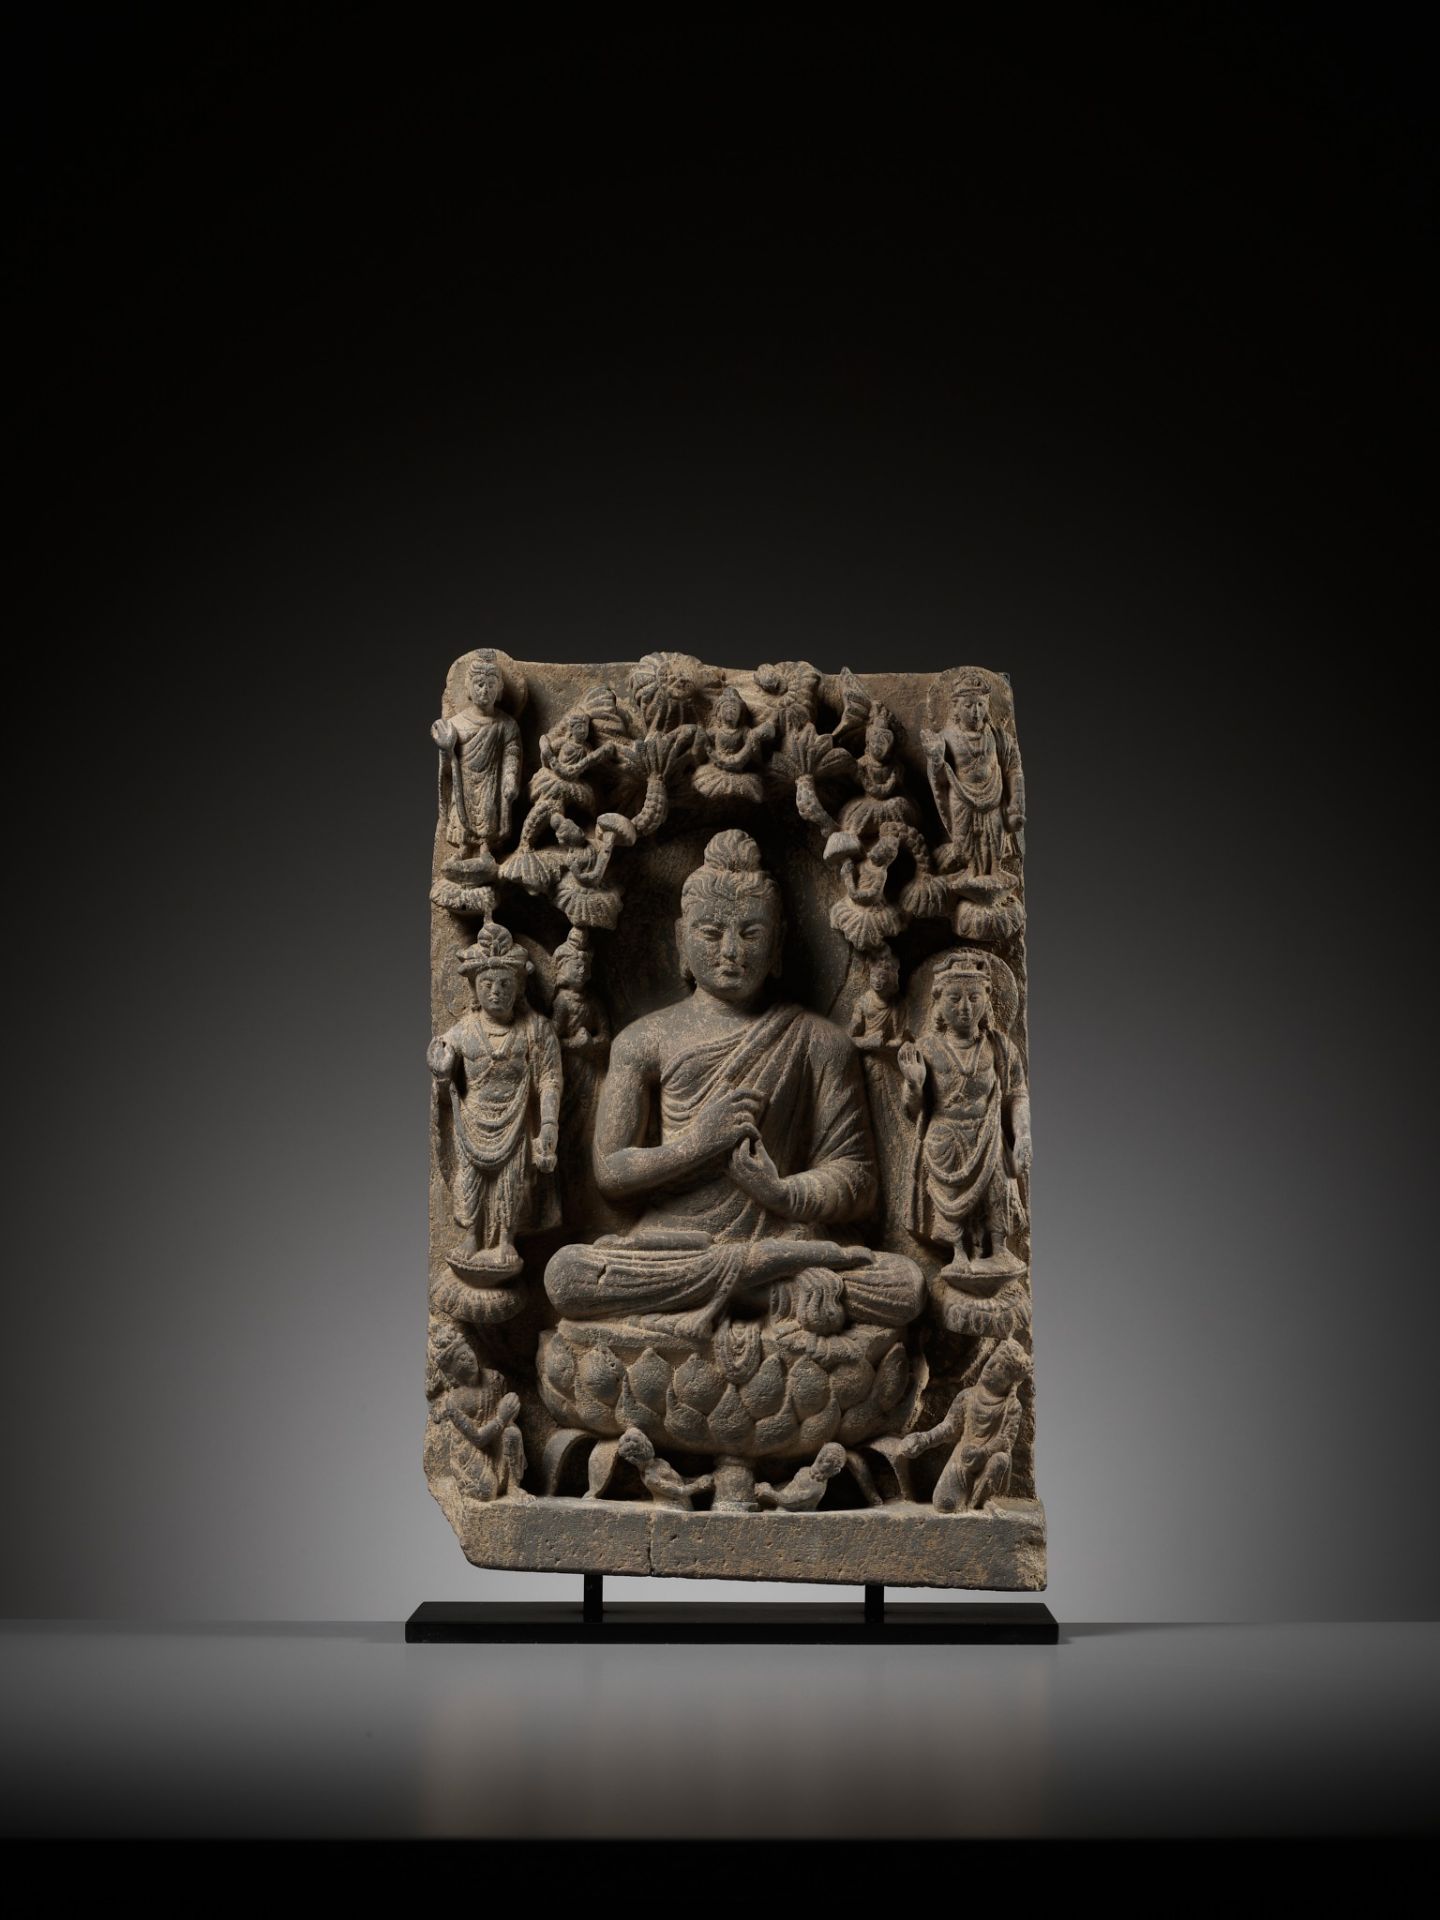 A SCHIST STELE DEPICTING BUDDHA, ANCIENT REGION OF GANDHARA, 3RD-4TH CENTURY - Image 6 of 11